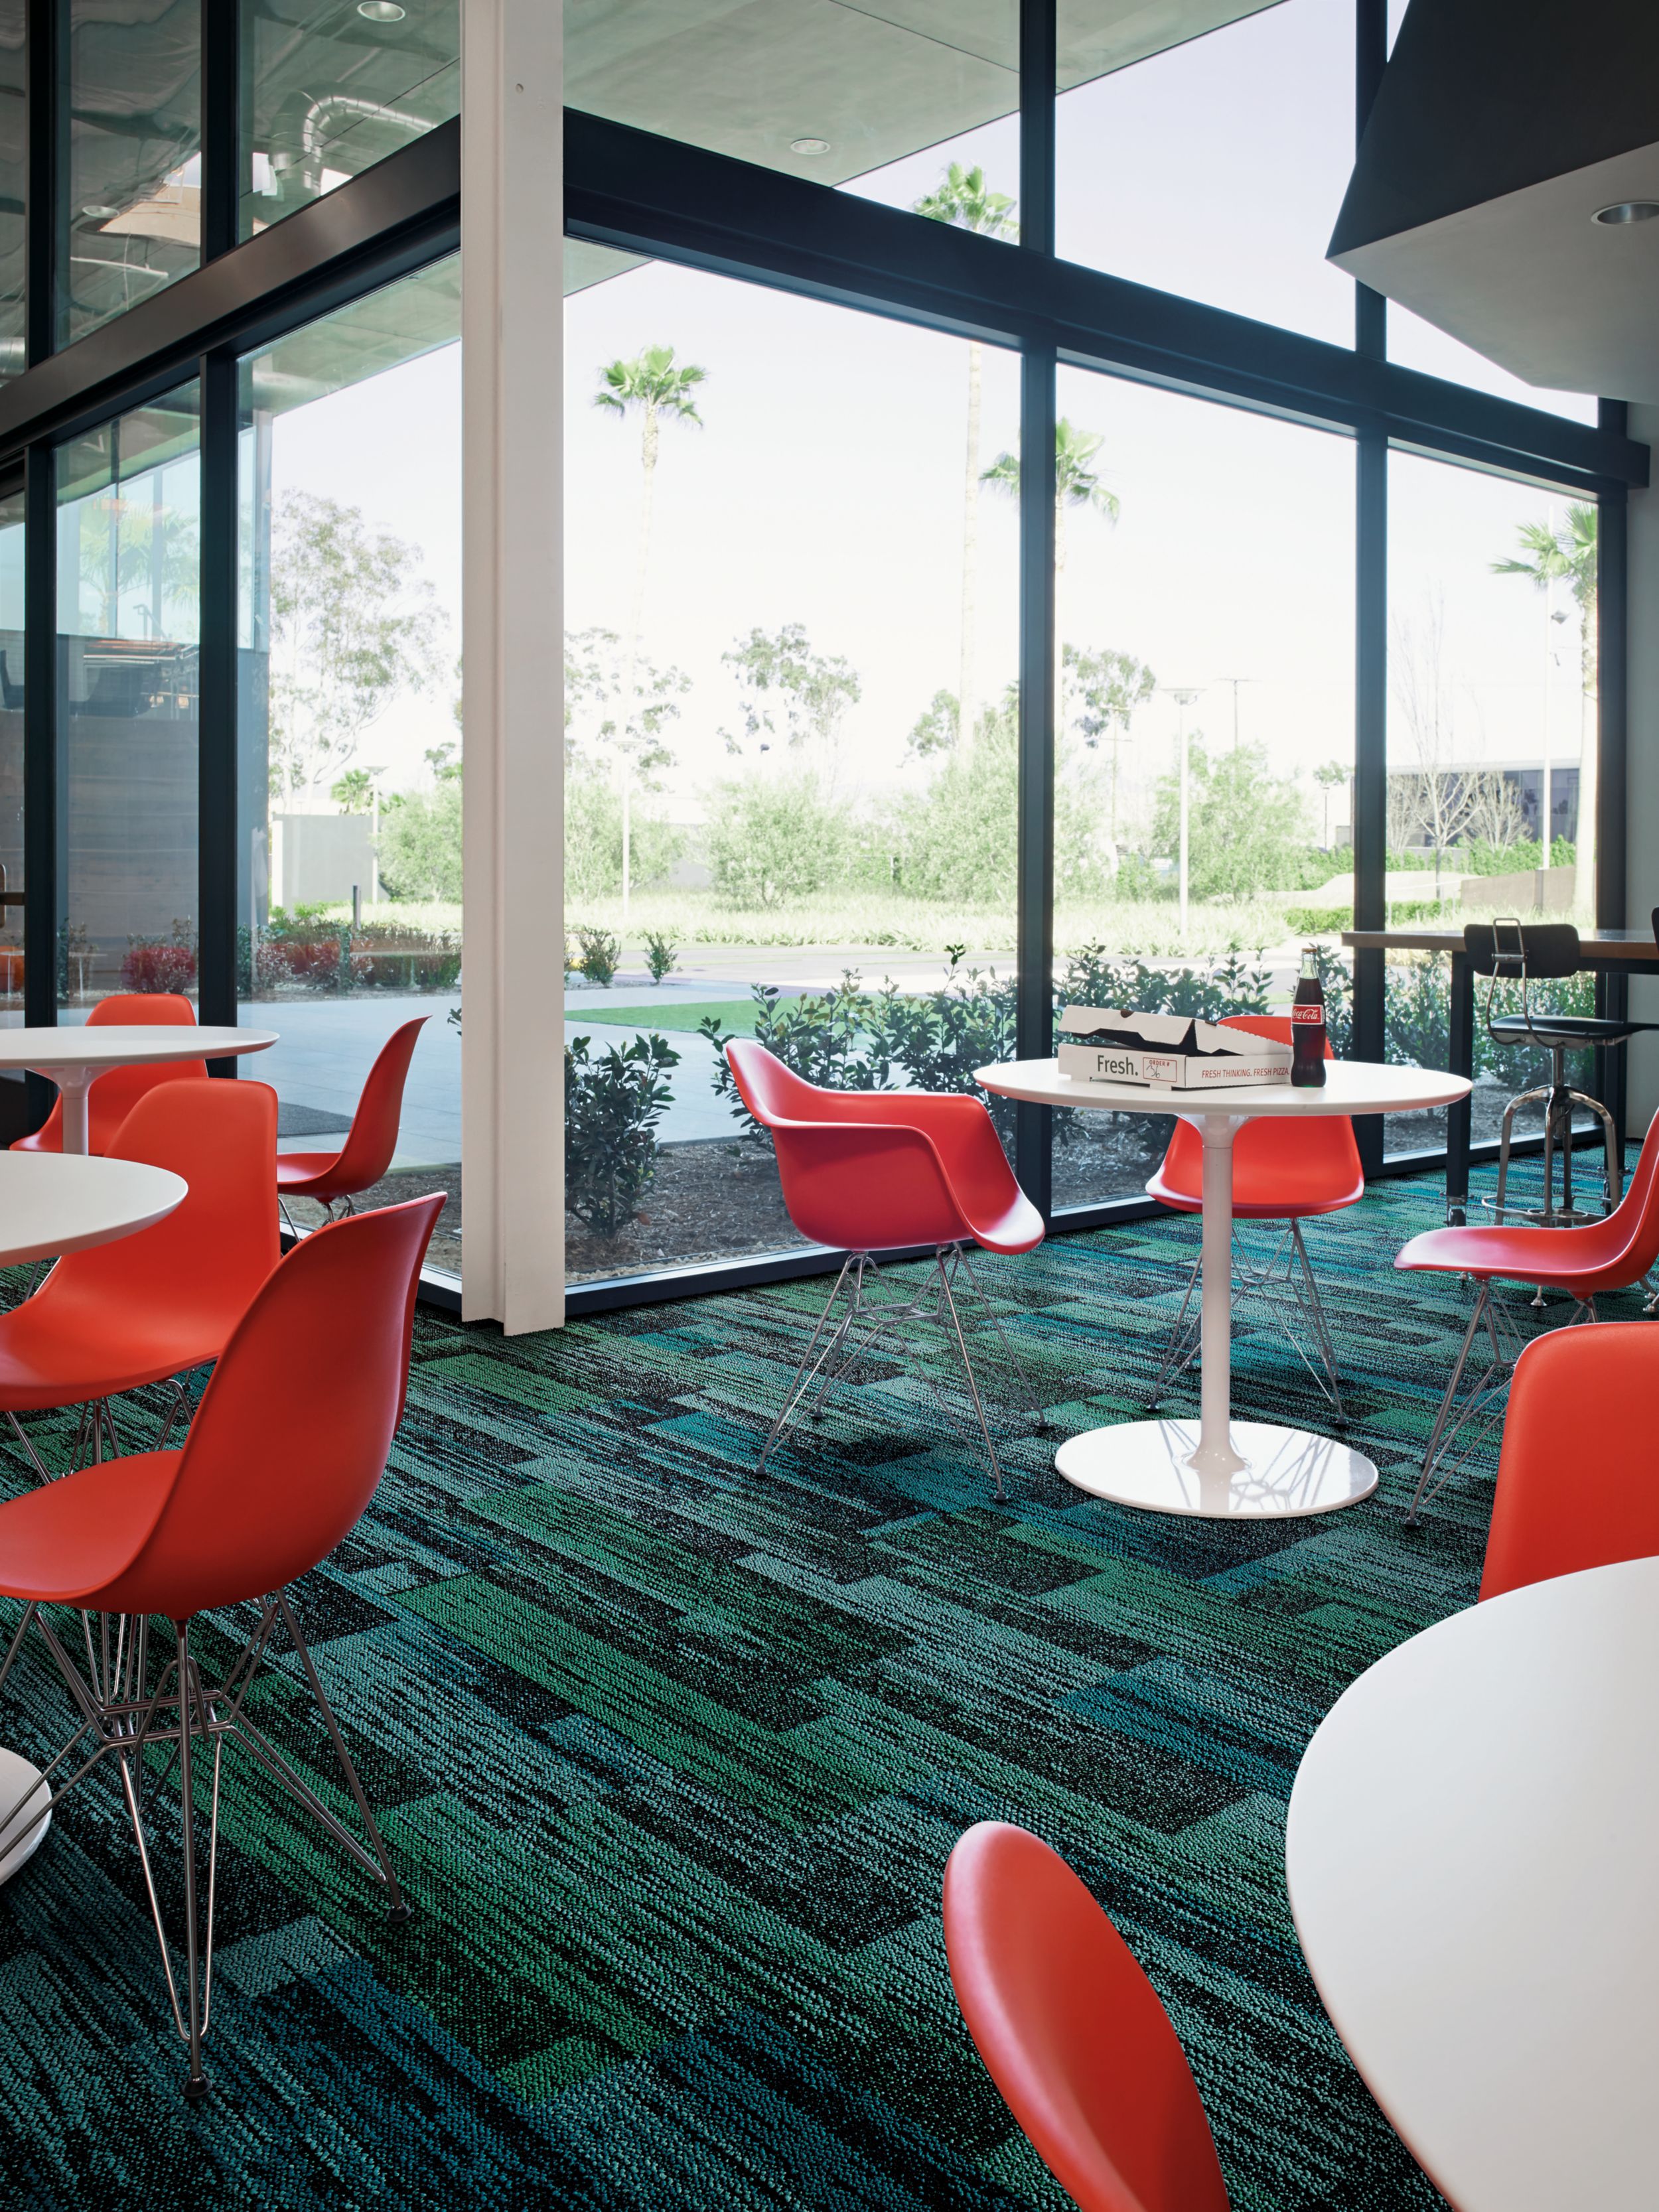 Interface Aerial Flying Colors AE317 plank carpet tile in cafe area image number 1